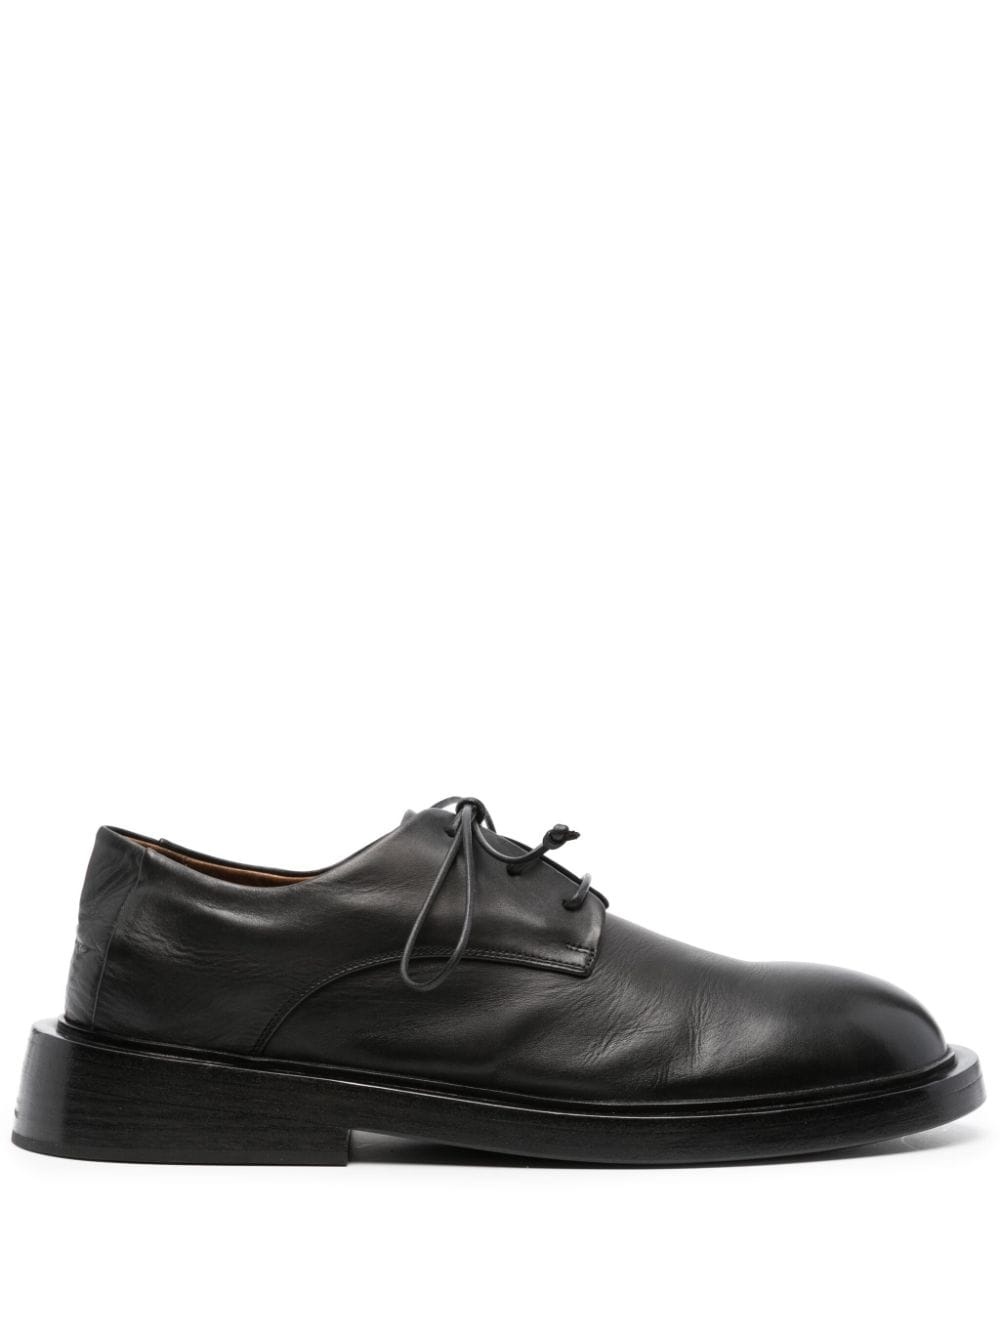 Marsèll lace-up leather shoes - Black